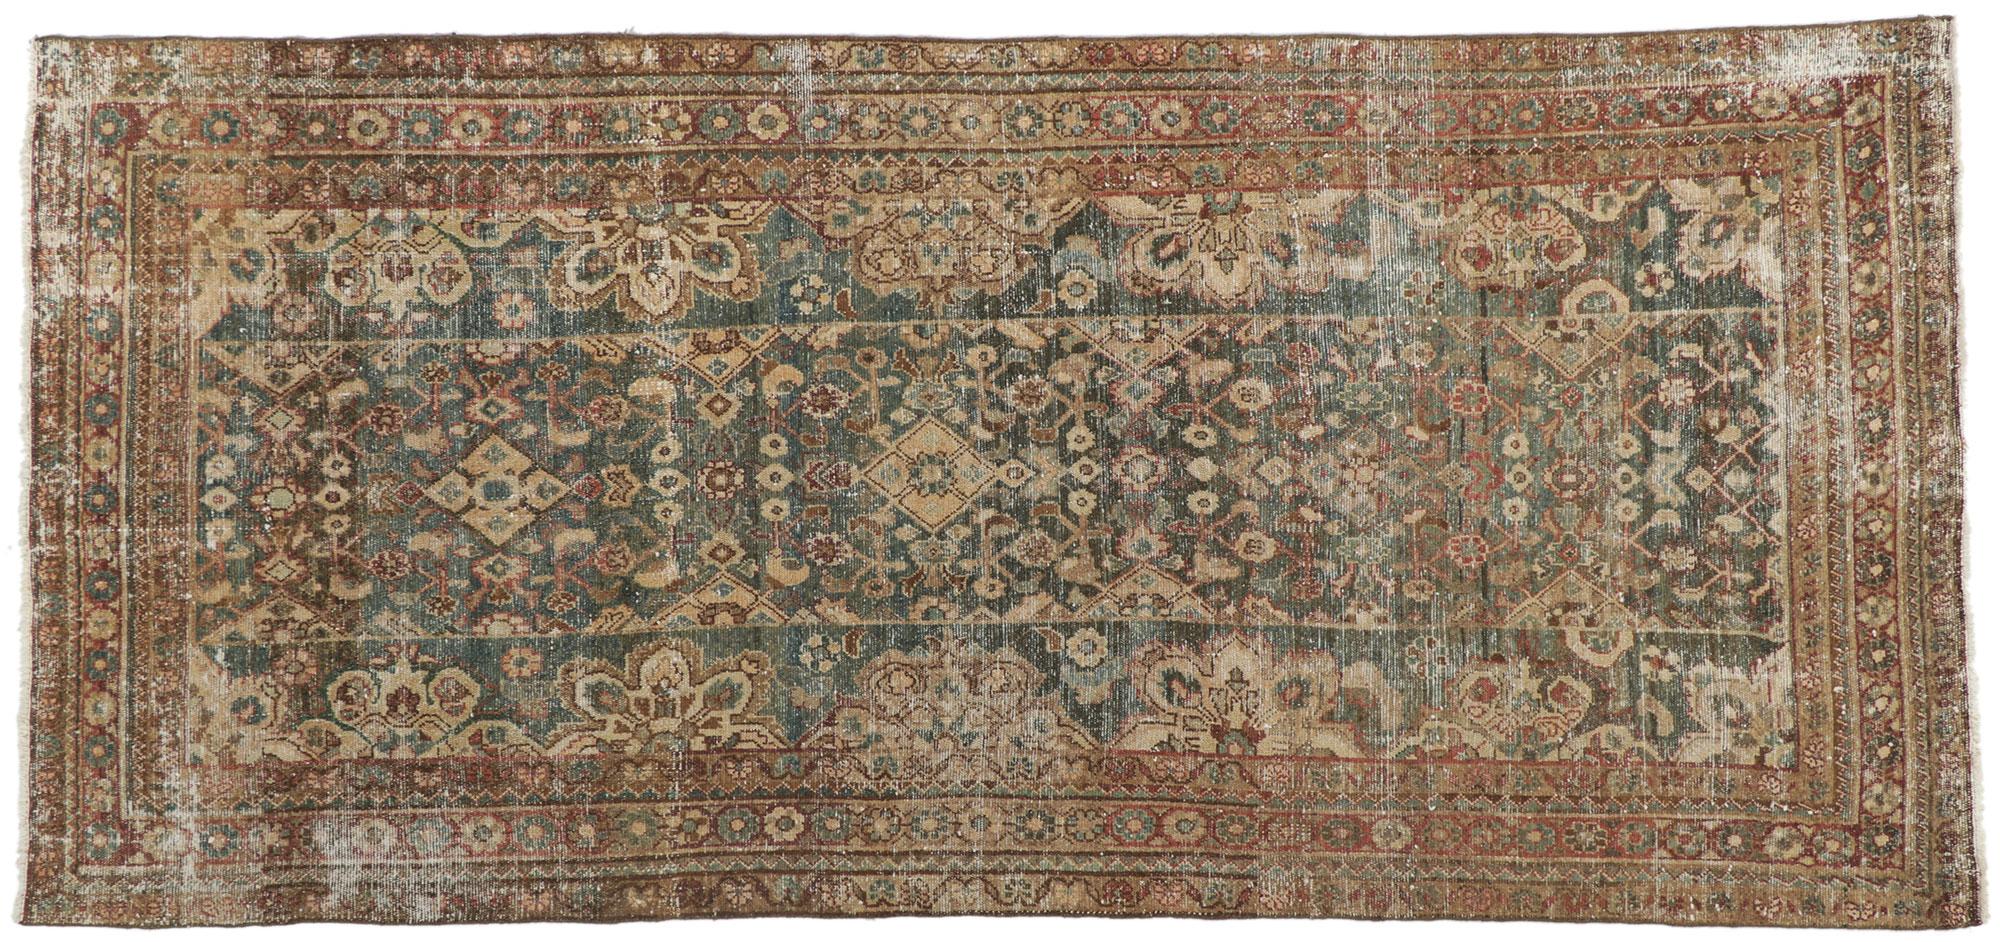 Antique-Worn Persian Malayer Rug, Relaxed Refinement Meets Rustic Charm For Sale 2